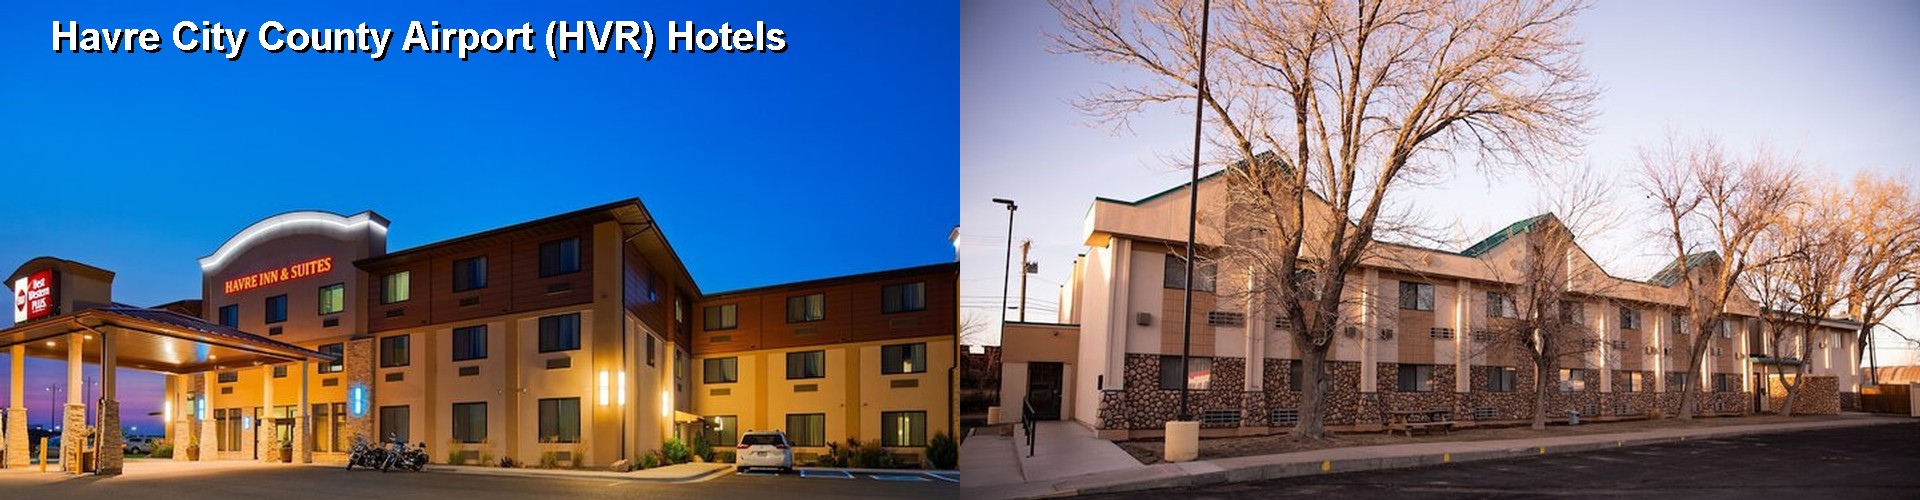 3 Best Hotels near Havre City County Airport (HVR)